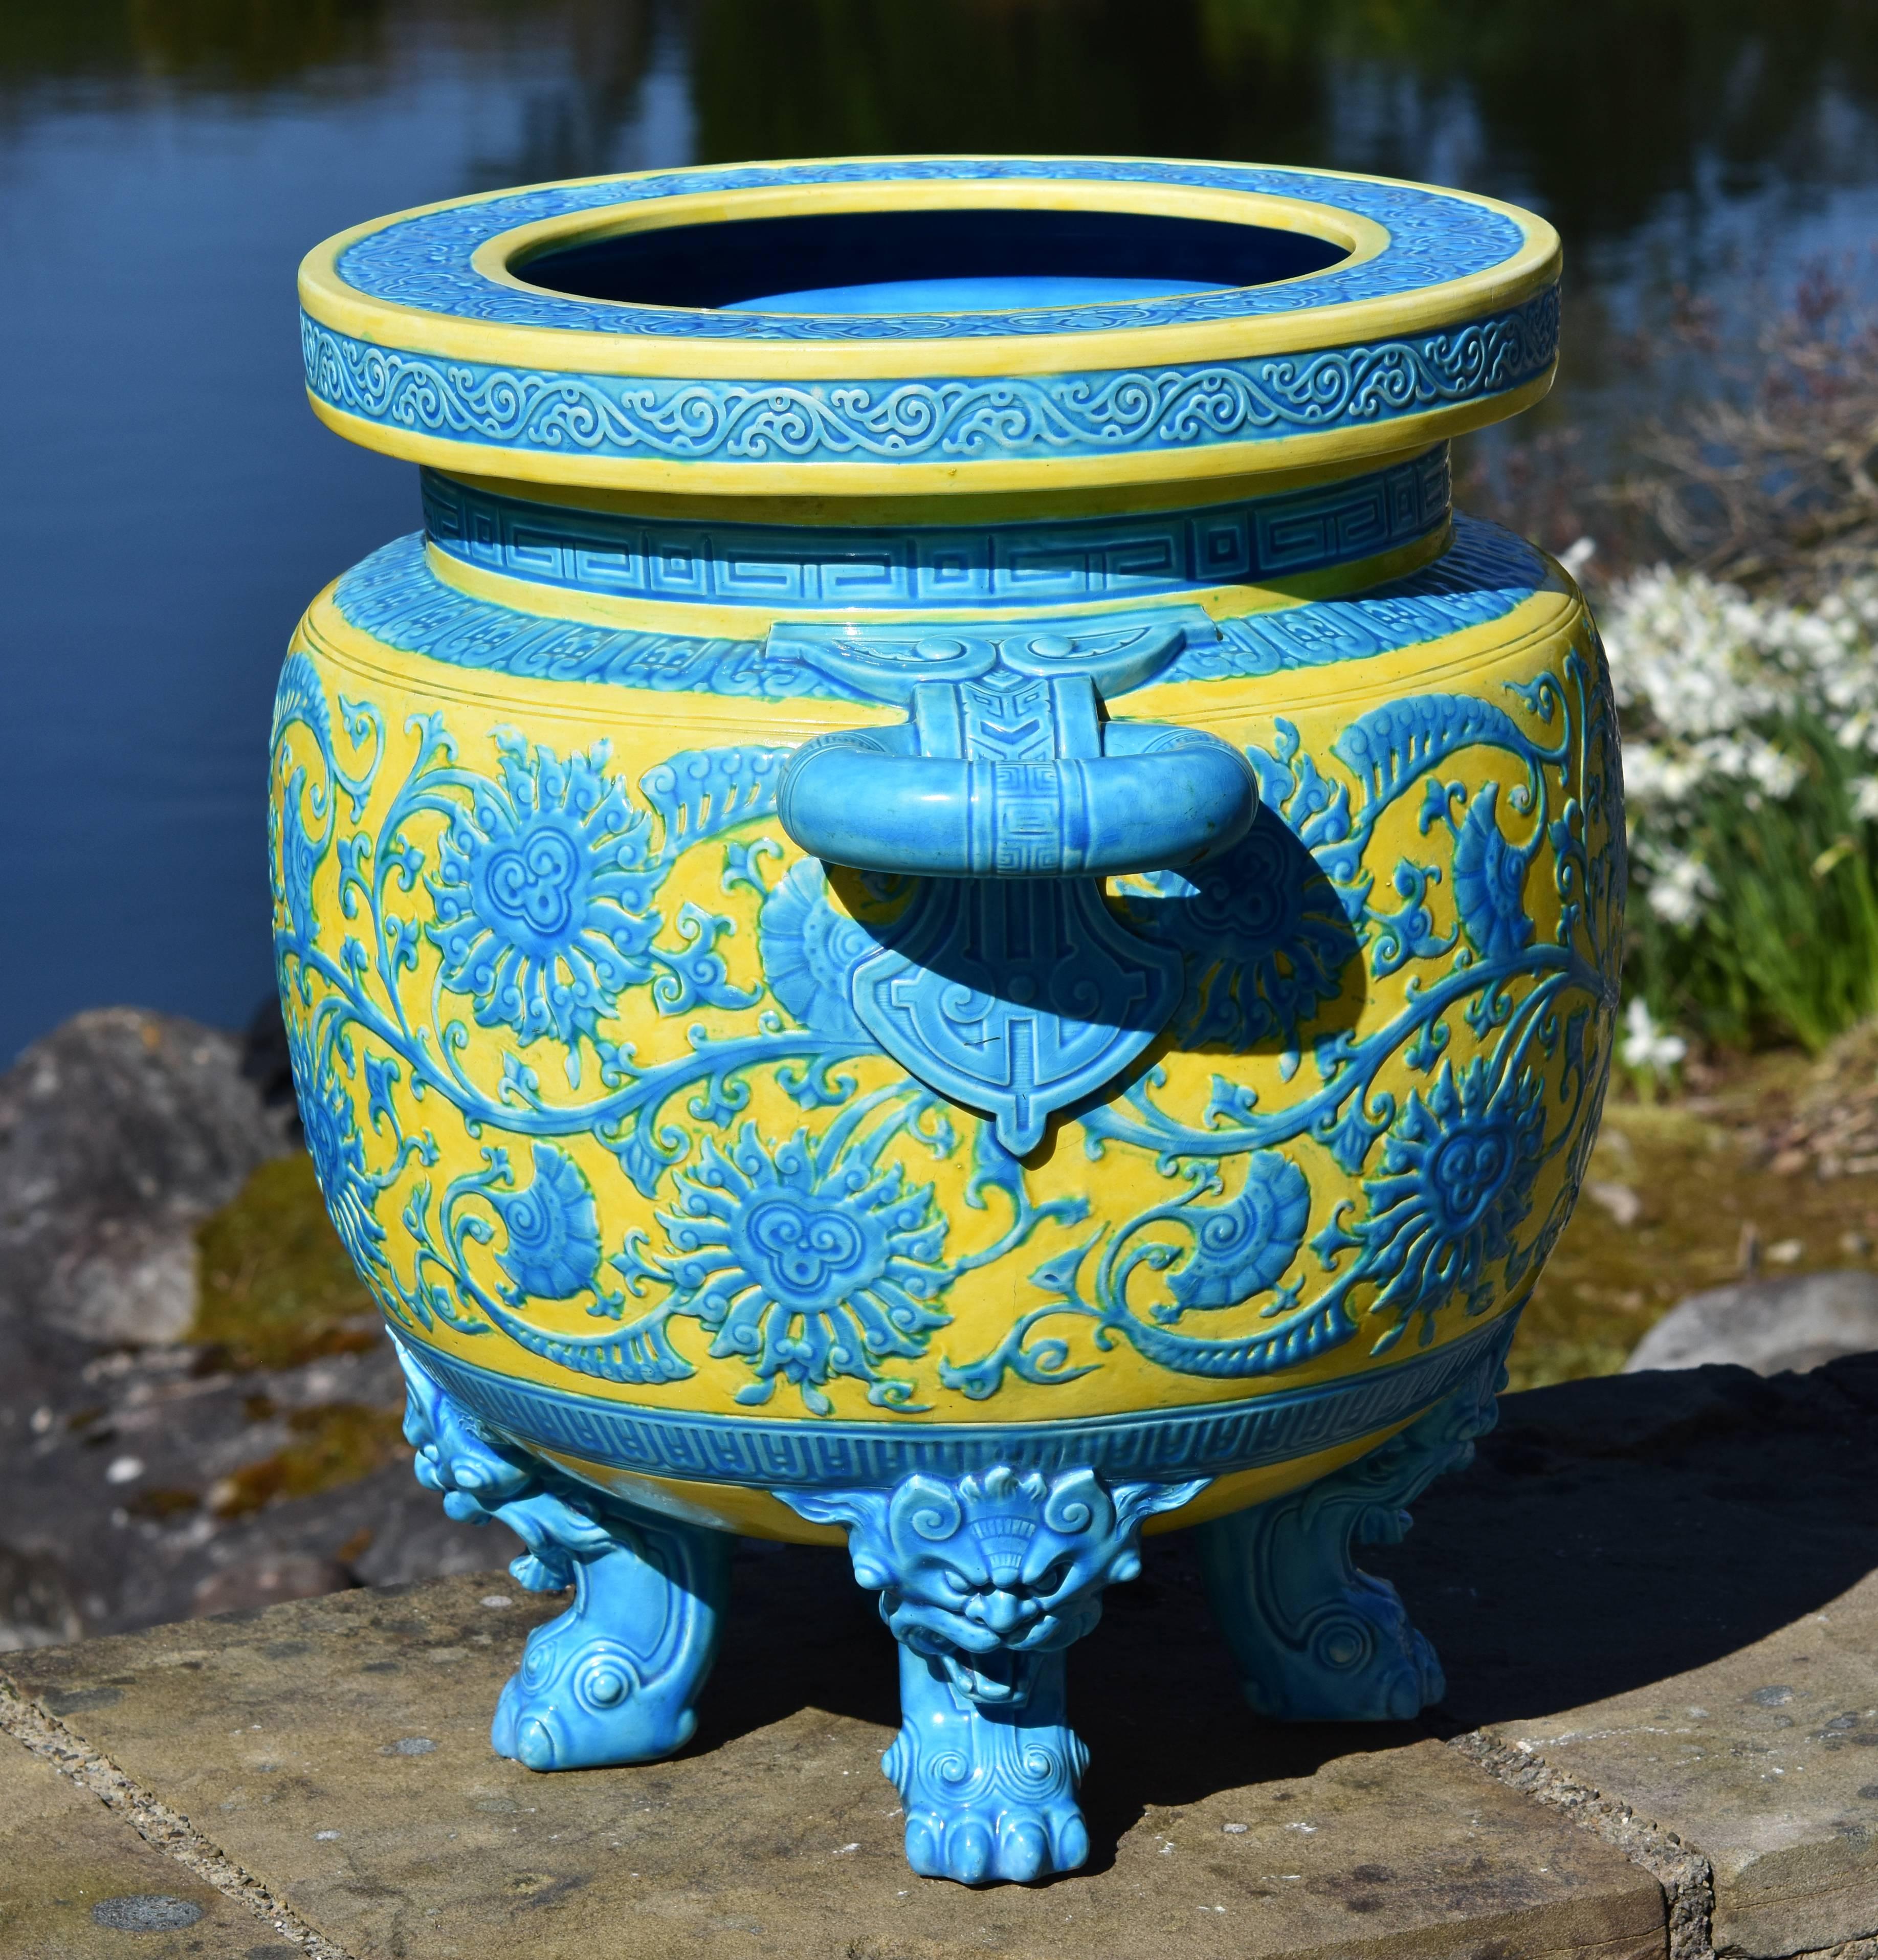 19th Century Monumental Minton Majolica Aesthetic Movement Jardinière In Excellent Condition In London, United Kindgom